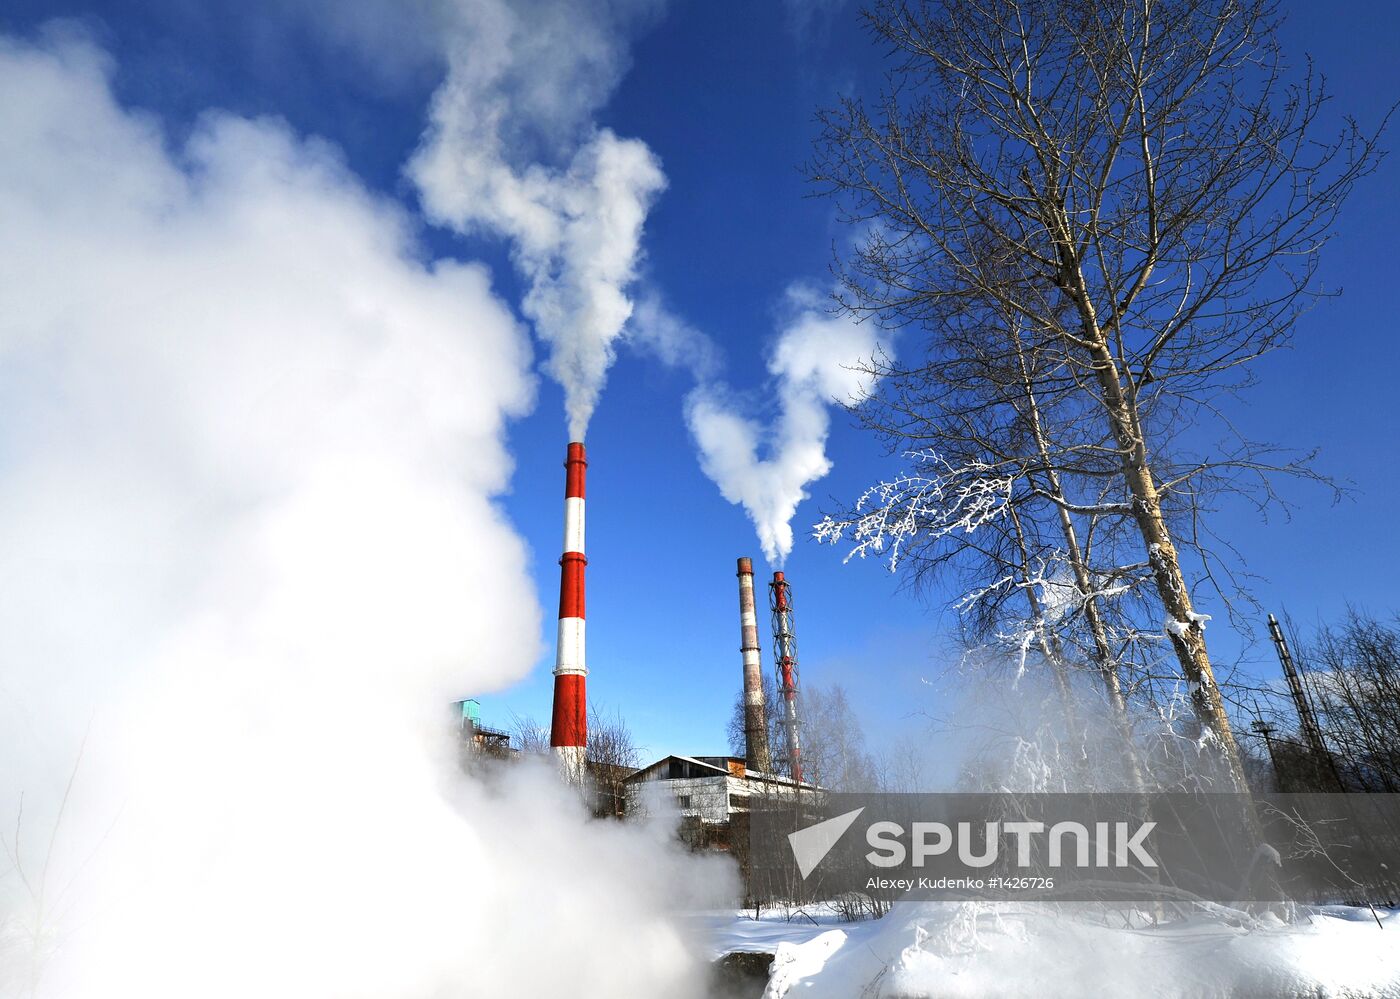 Baikalsk Pulp and Paper Mill to be closed